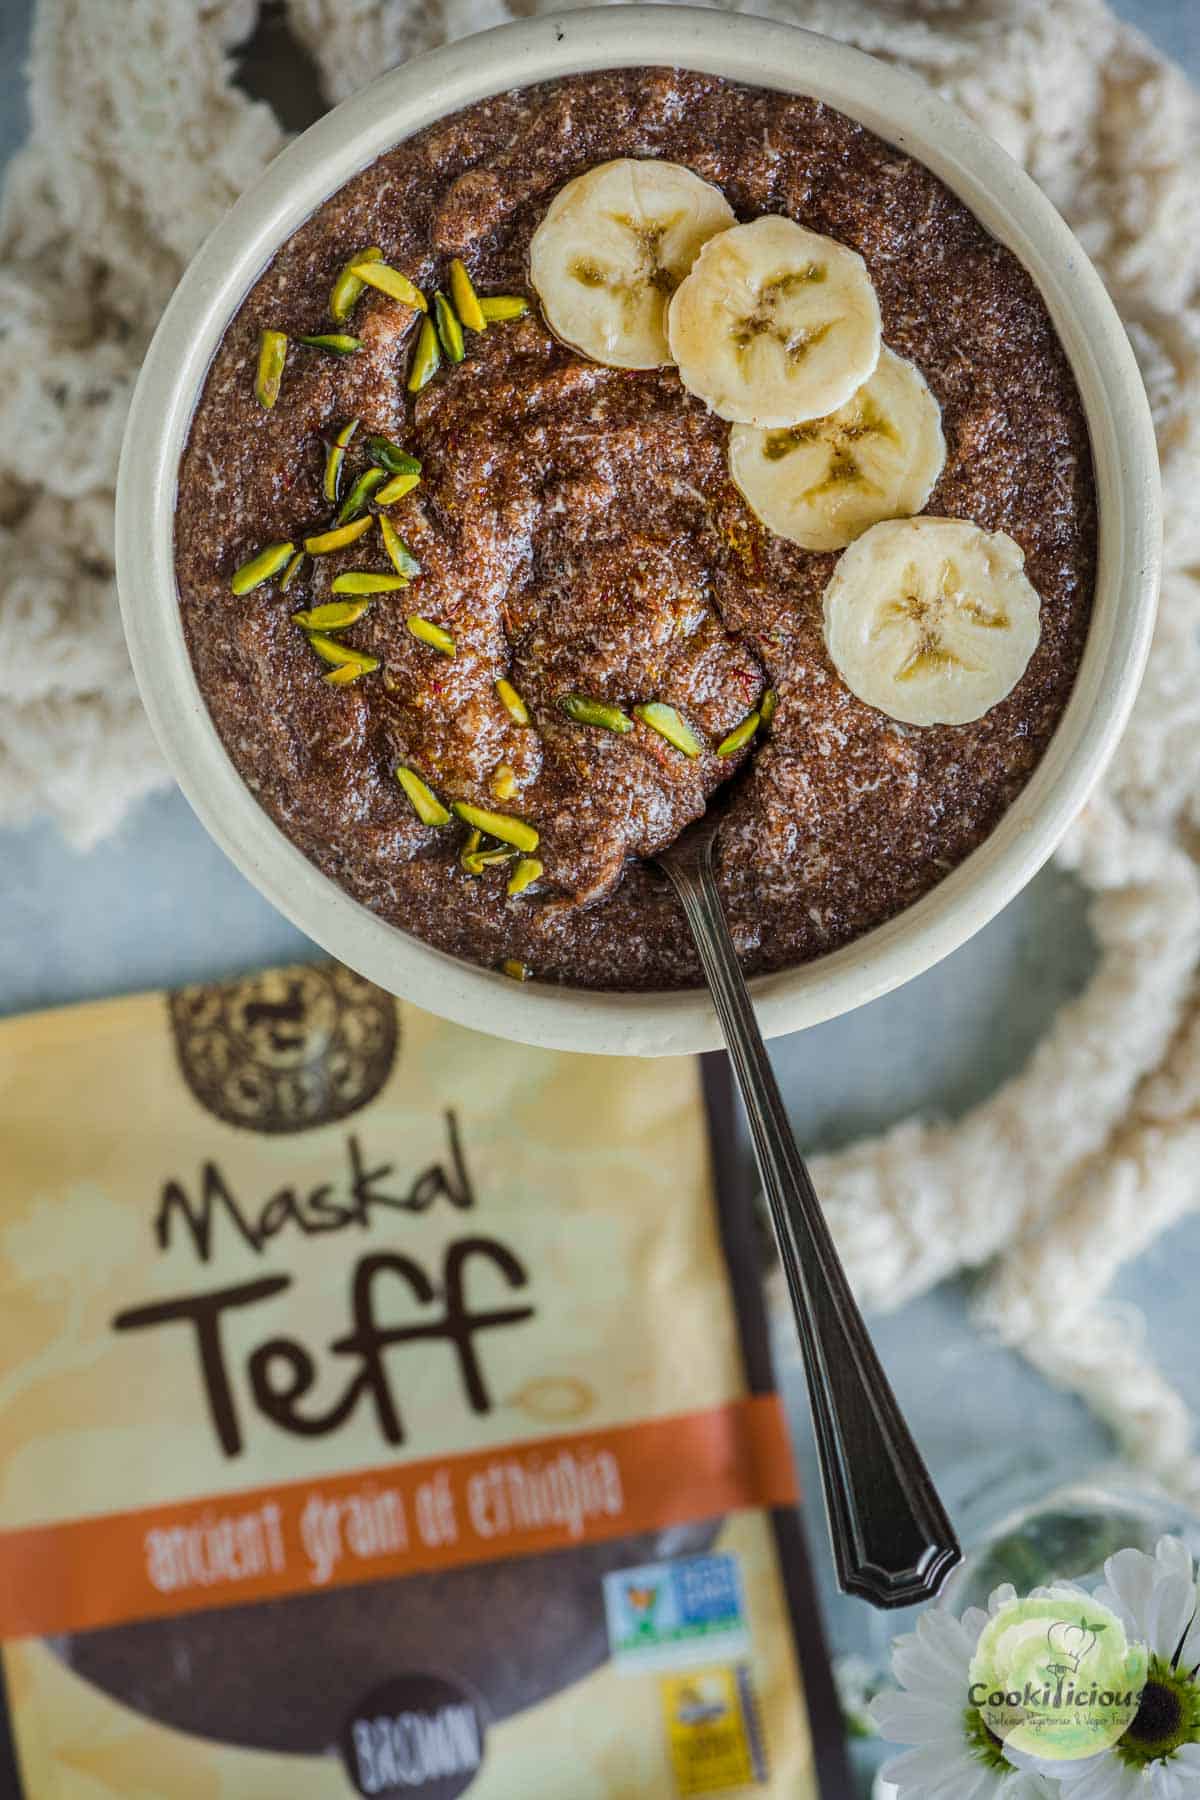 Vegan Teff Kheer Porridge served in a bowl with a packet of Maskal Teff on the side